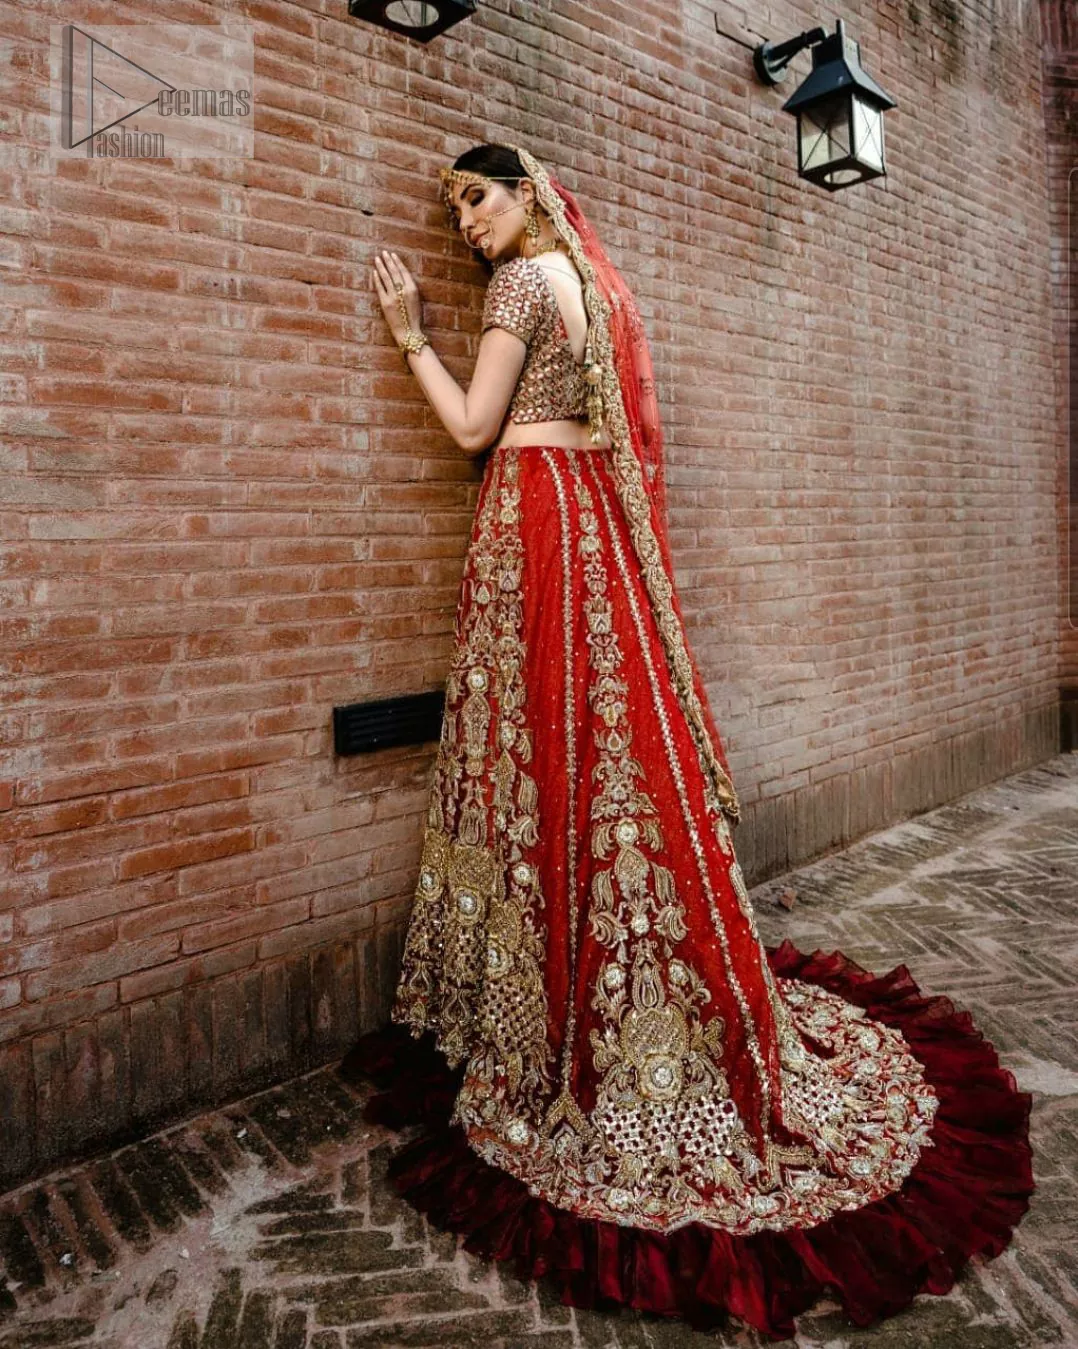 Red Ruffled Back Train Lehenga Blouse – Dupatta. It’s beautiful sweetheart neckline proceeds with mesmerizing Golden embroidery, all designed fantastically for your reception day.